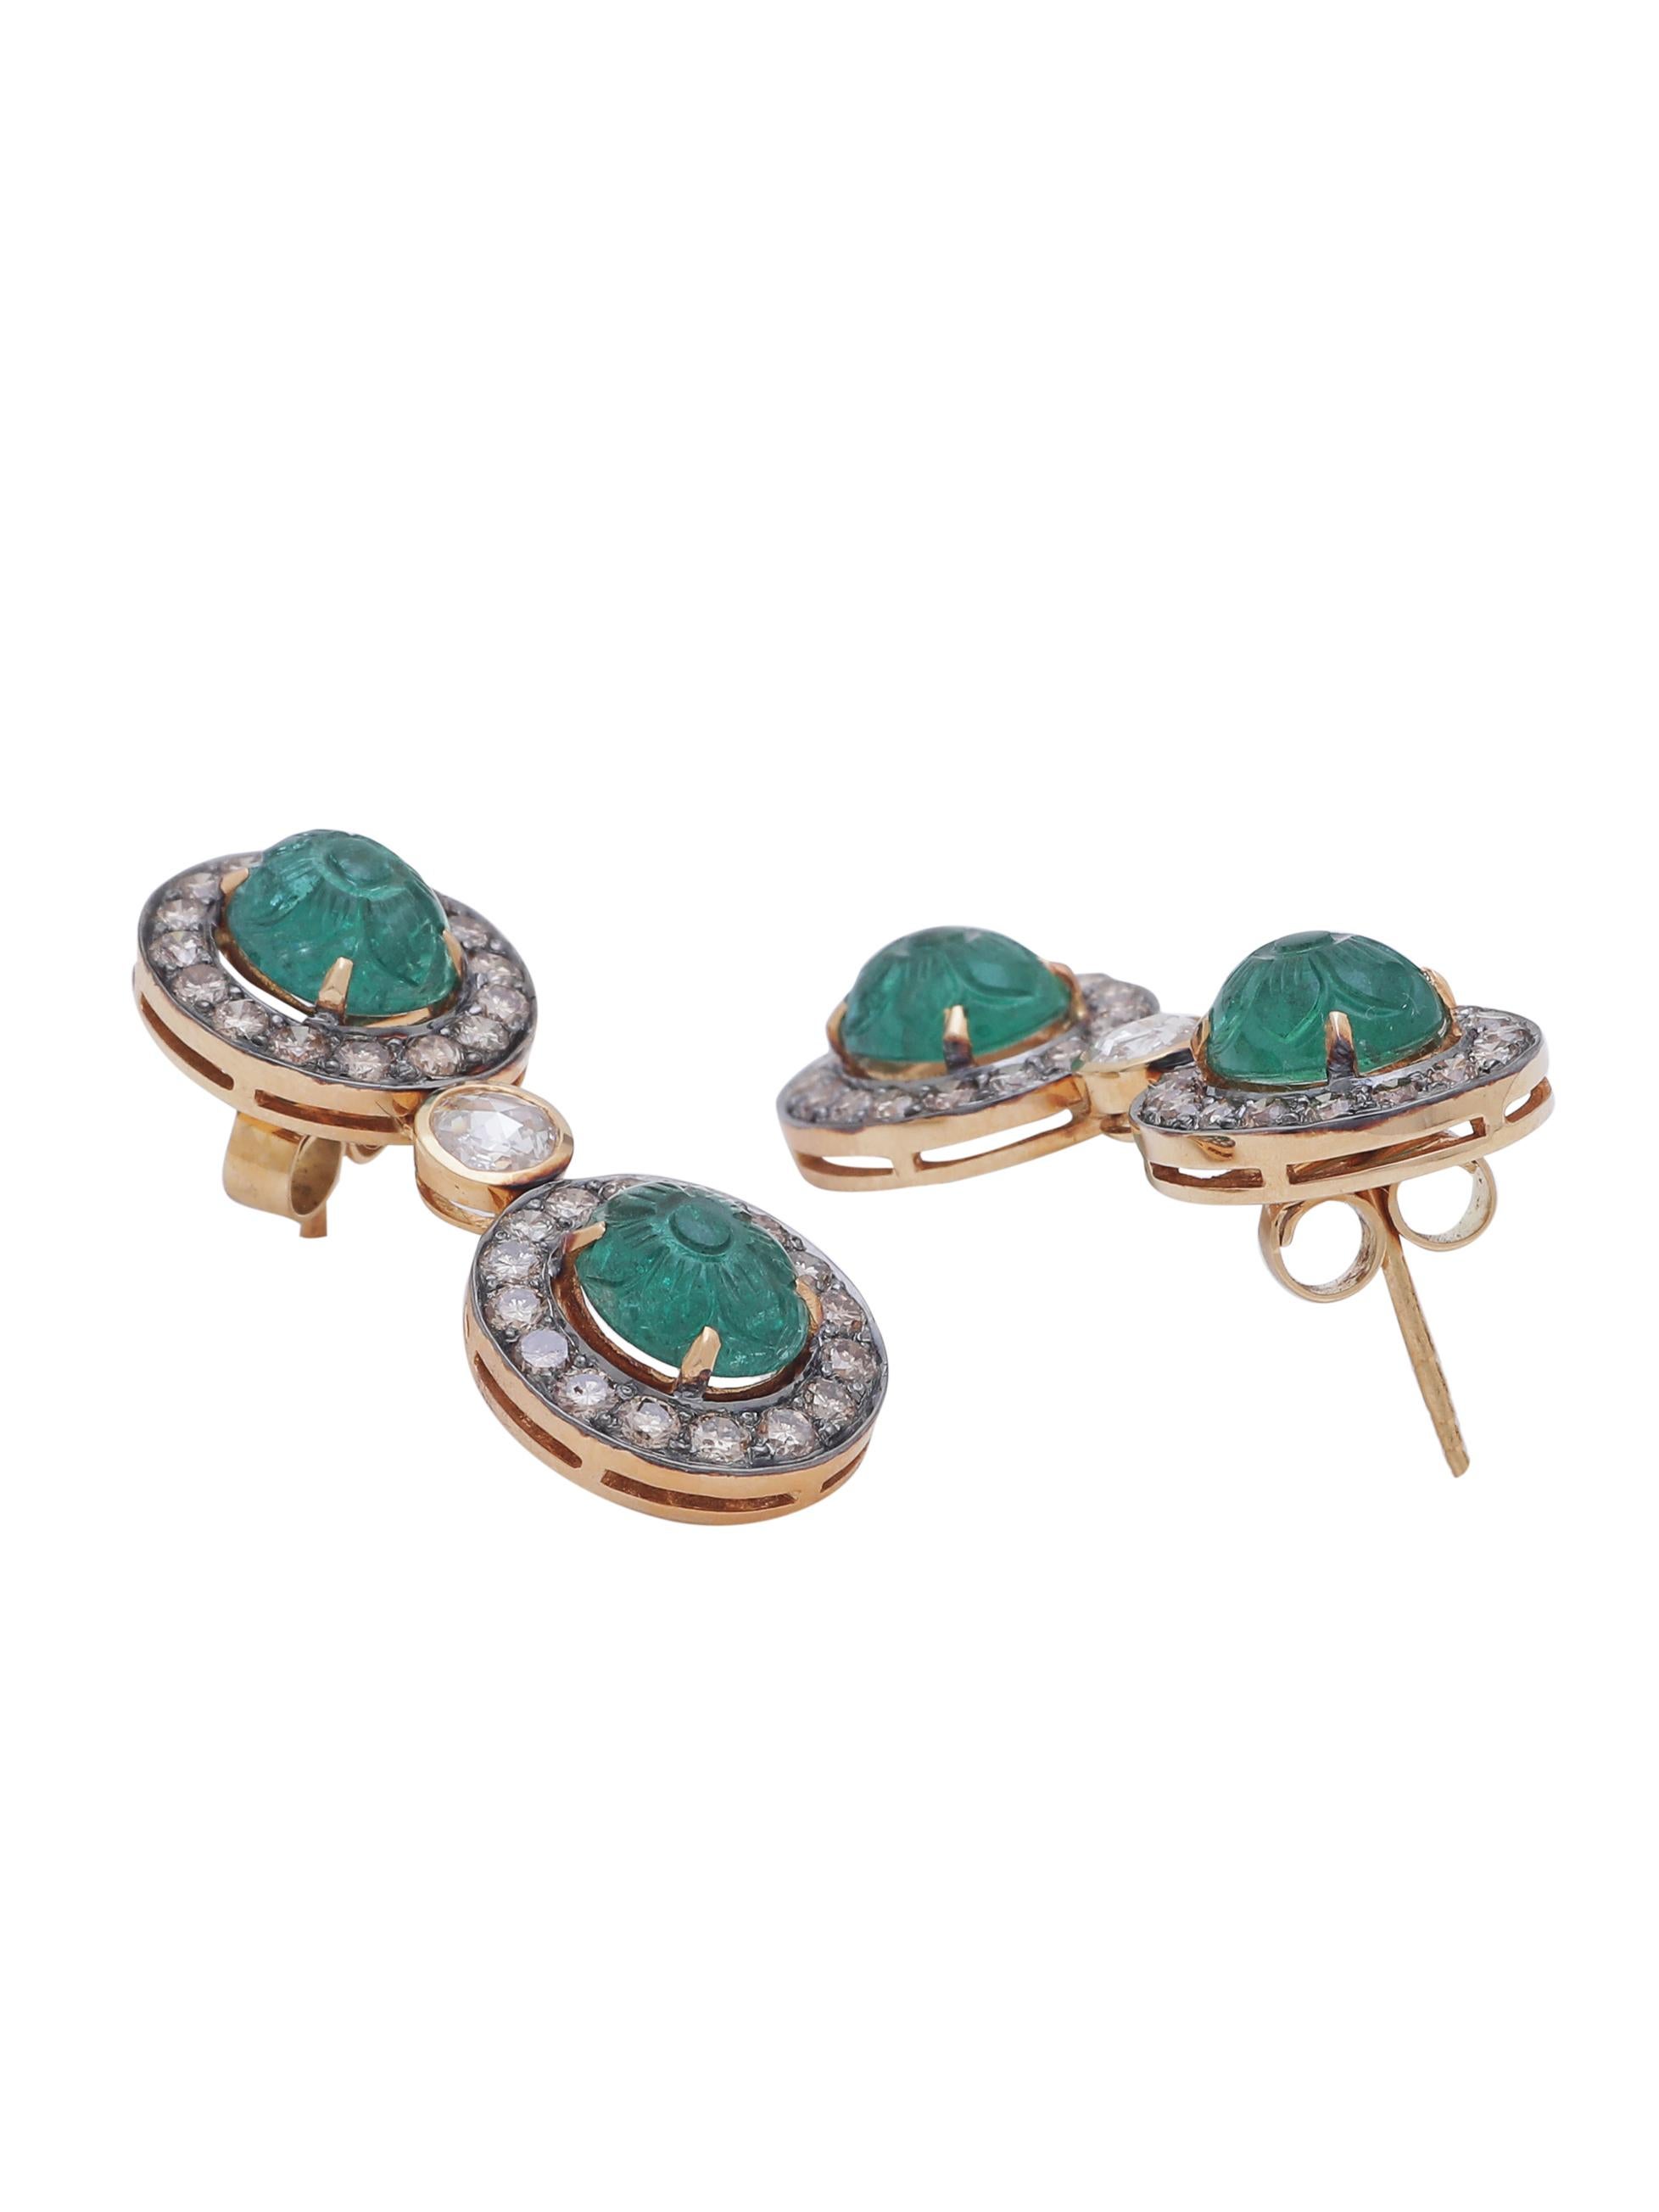 A beautiful earring pair with Zambian Natural Hand carved emerald set with diamonds all around and a pair of Round clean rosecut diamonds in the centre.
The carving with floral motif is inspired by the Mughal art of engraving on precious stones and